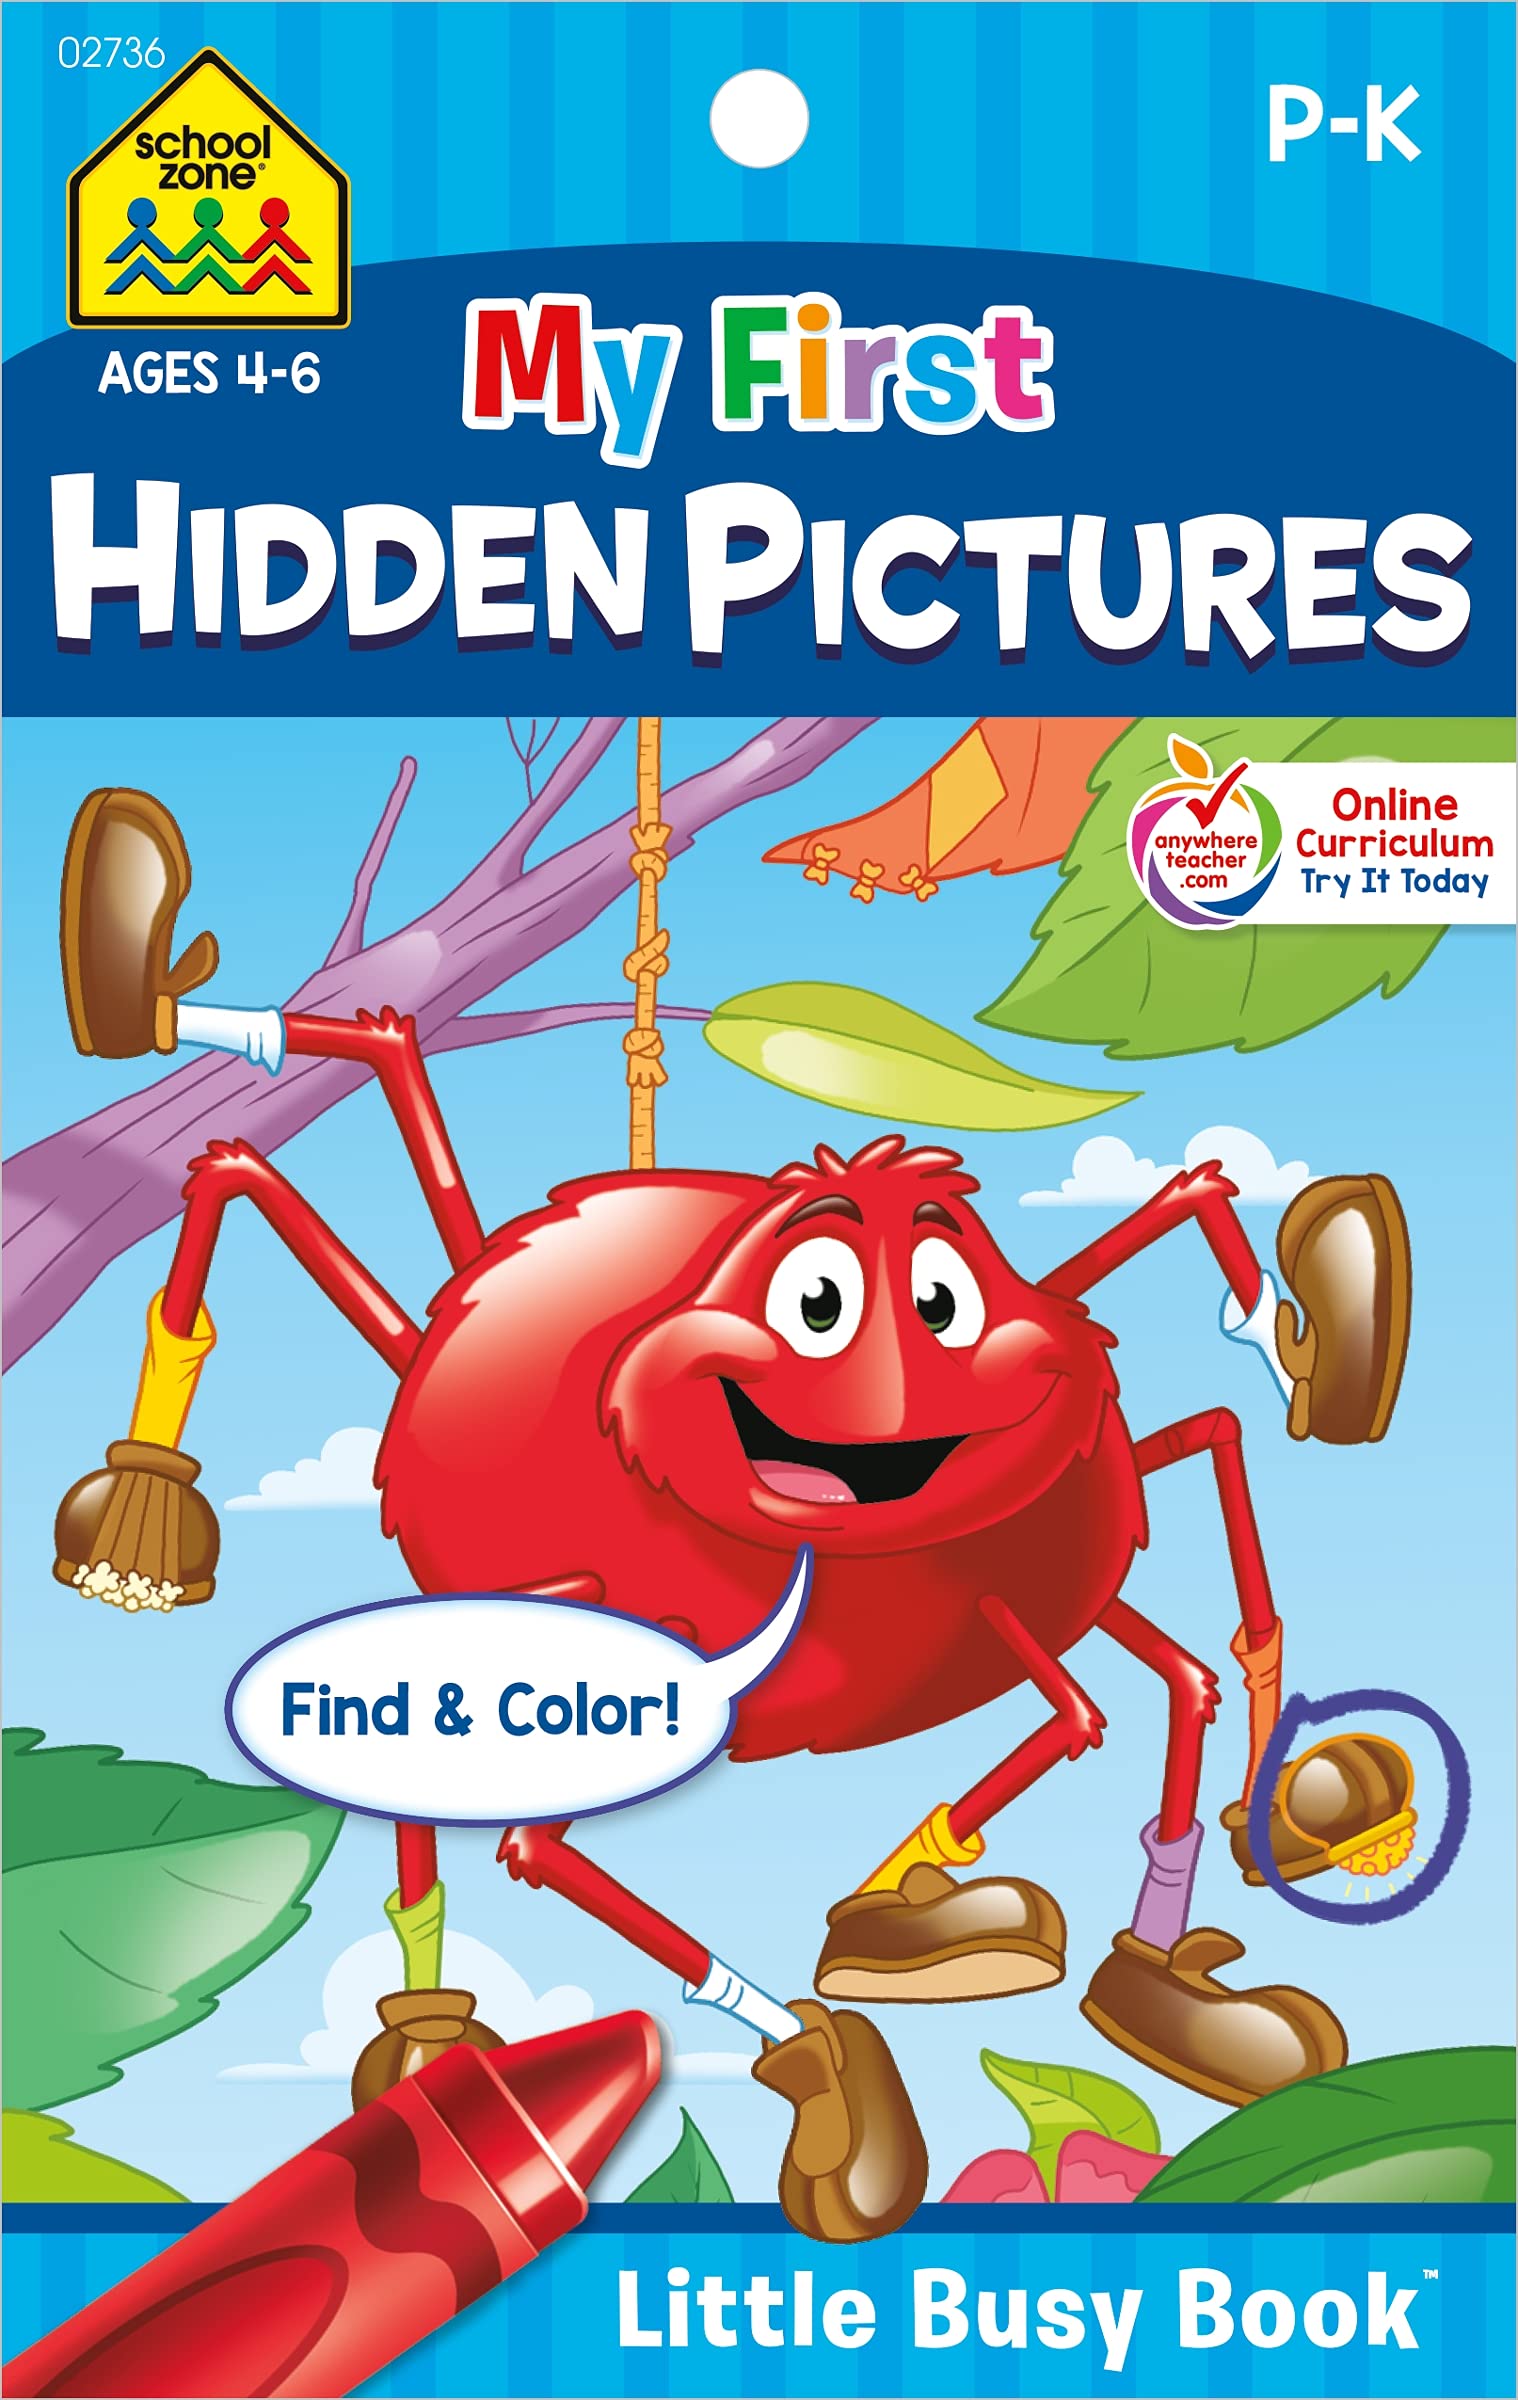 School Zone - My First Hidden Pictures Workbook - Ages 4 to 6, Preschool to Kindergarten, Activity Pad, Search & Find, Picture Puzzles, Coloring, and More (School Zone Little Busy Book™ Series)